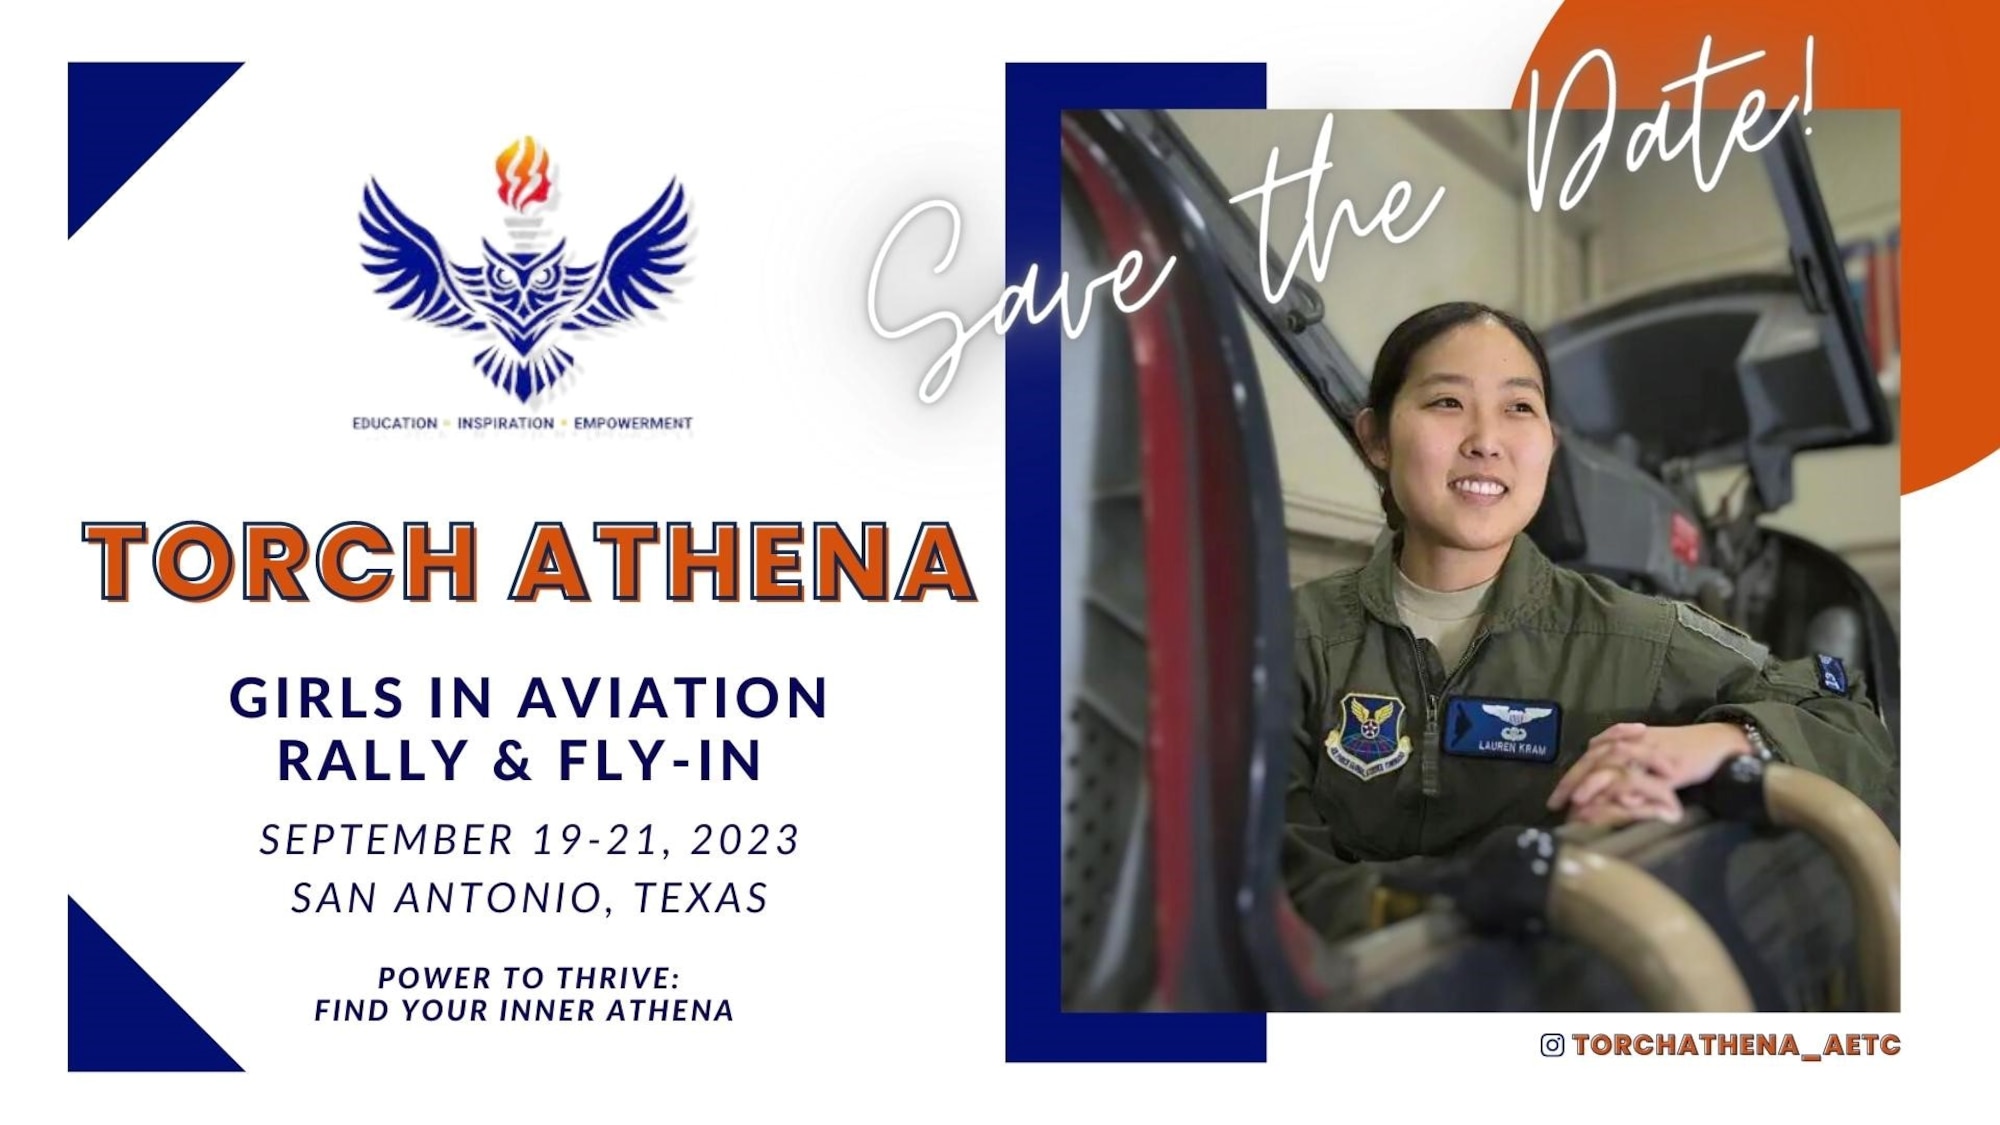 Torch Athena members, a women’s initiative program within Air Education and Training Command, are holding an inaugural rally and fly-in, Sept. 19-21, 2023, in San Antonio, Texas.